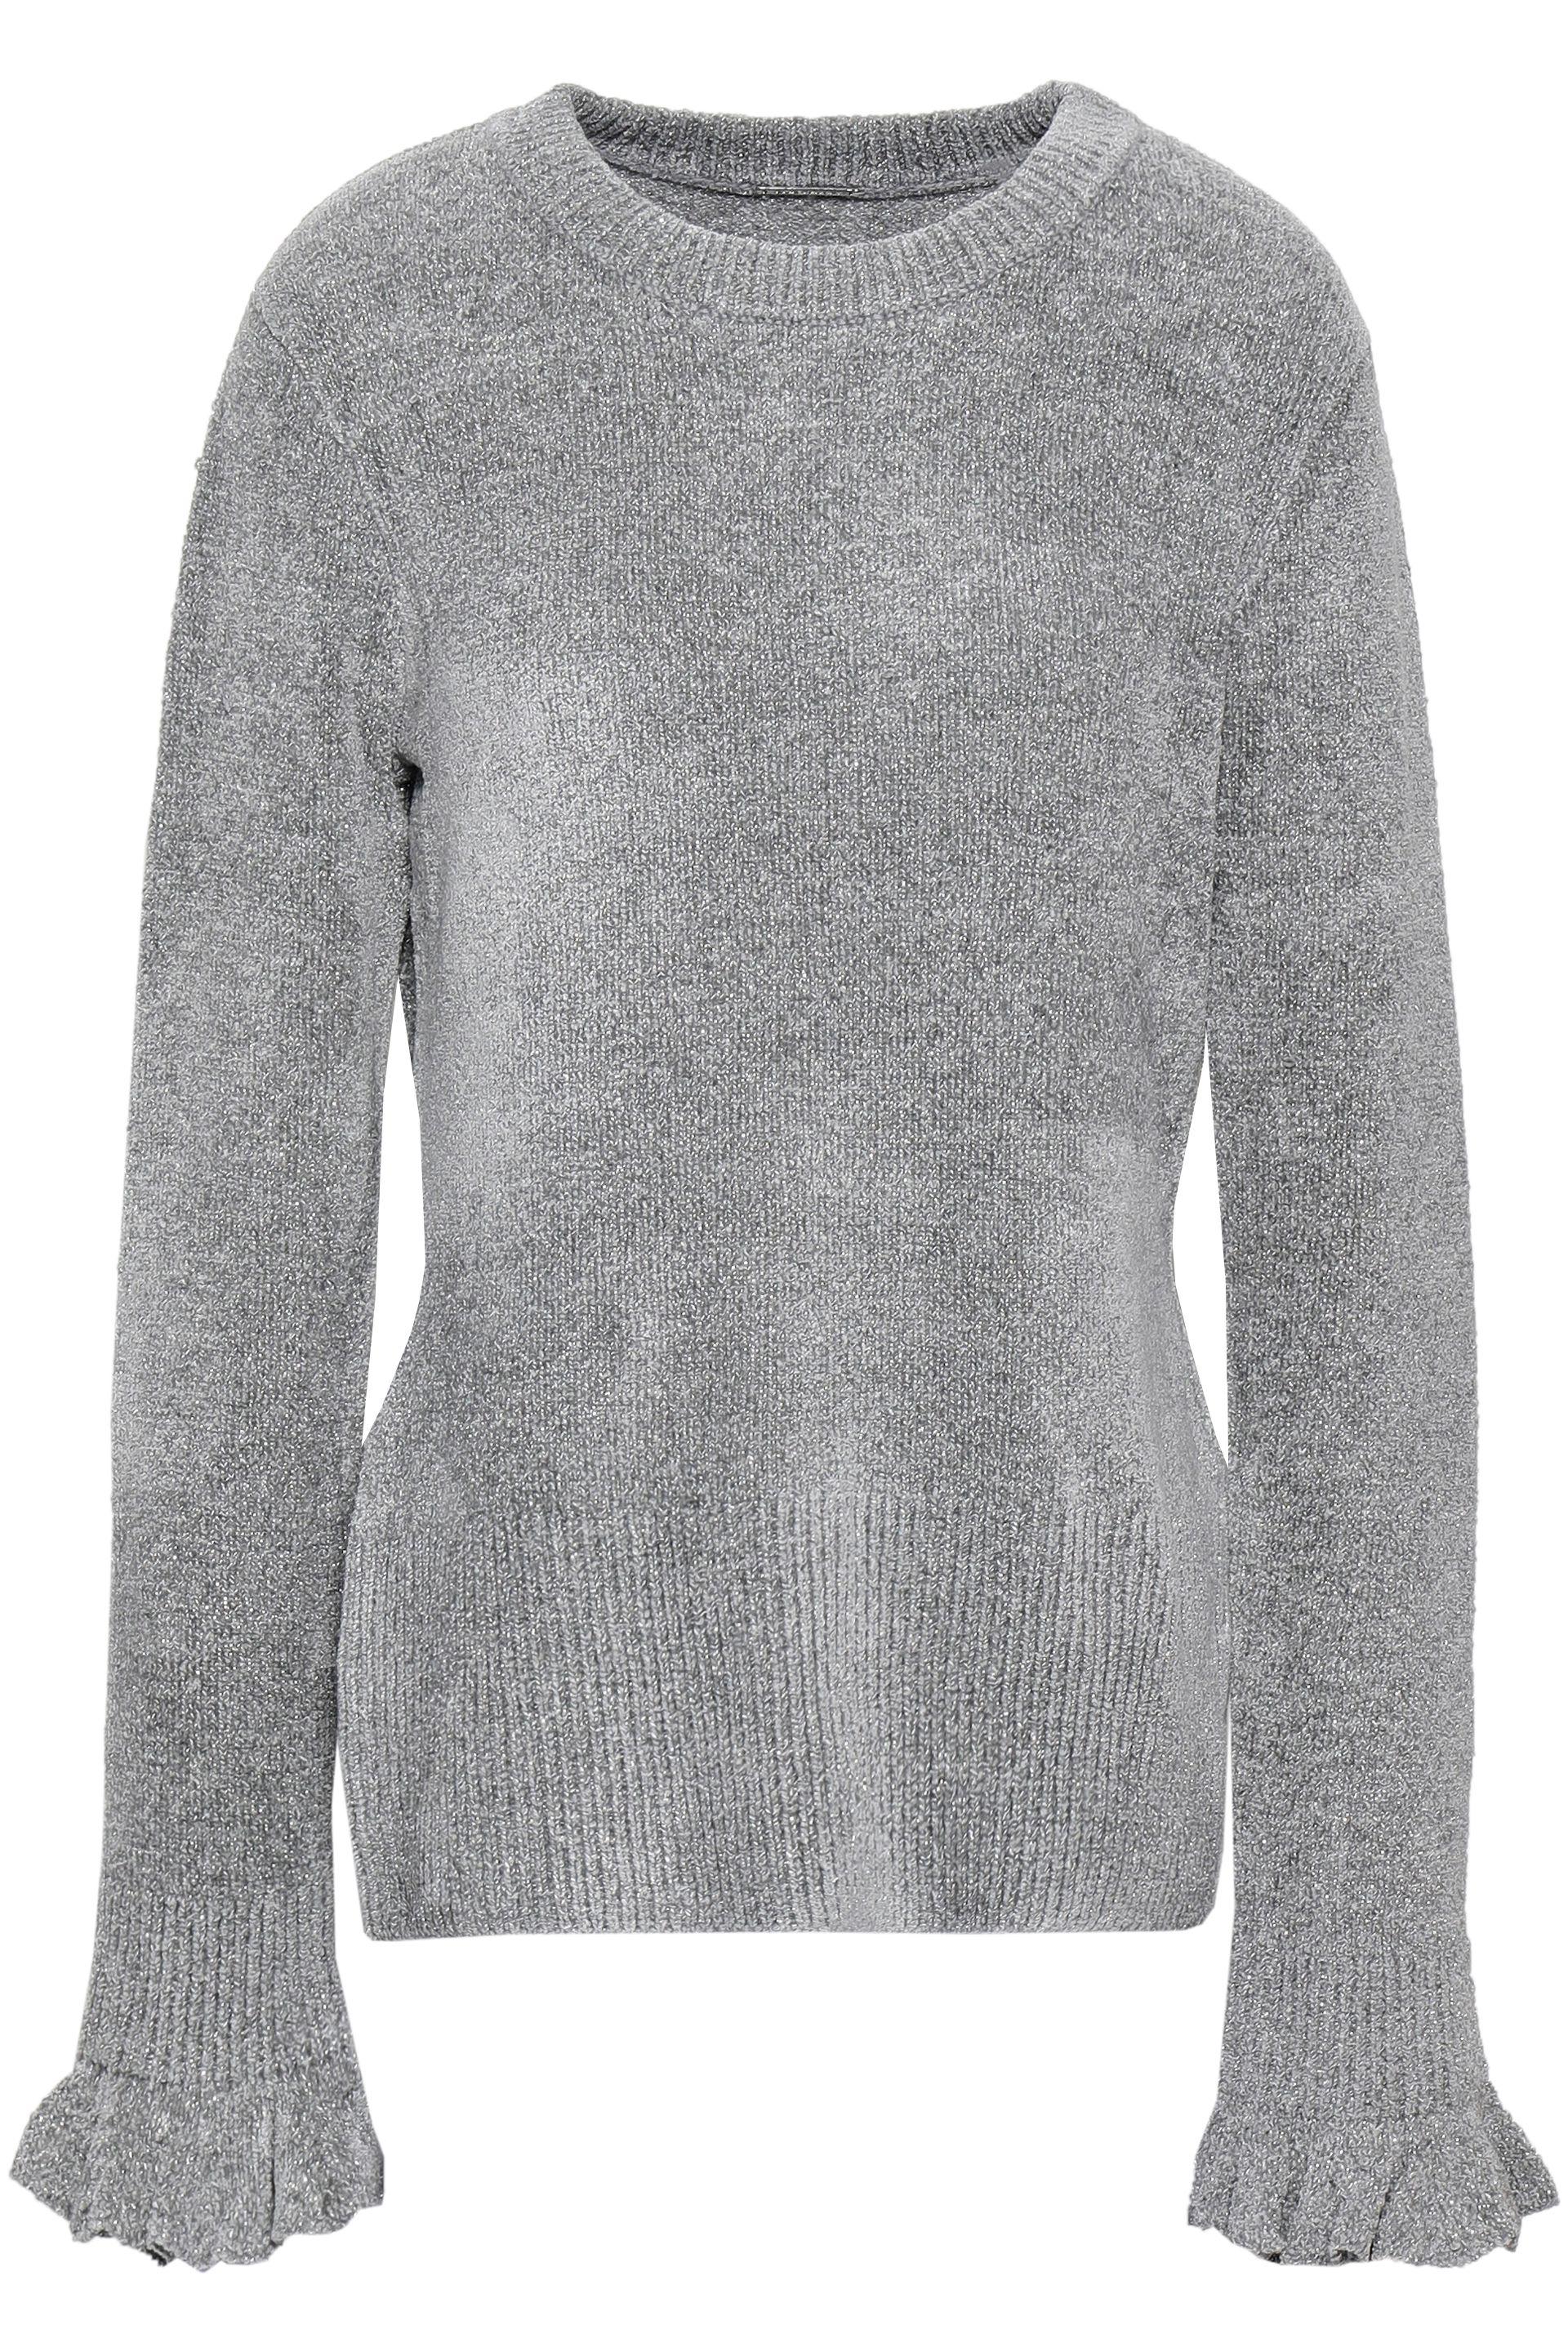 Elie Tahari Synthetic Embla Metallic Knitted Sweater Gray - Lyst